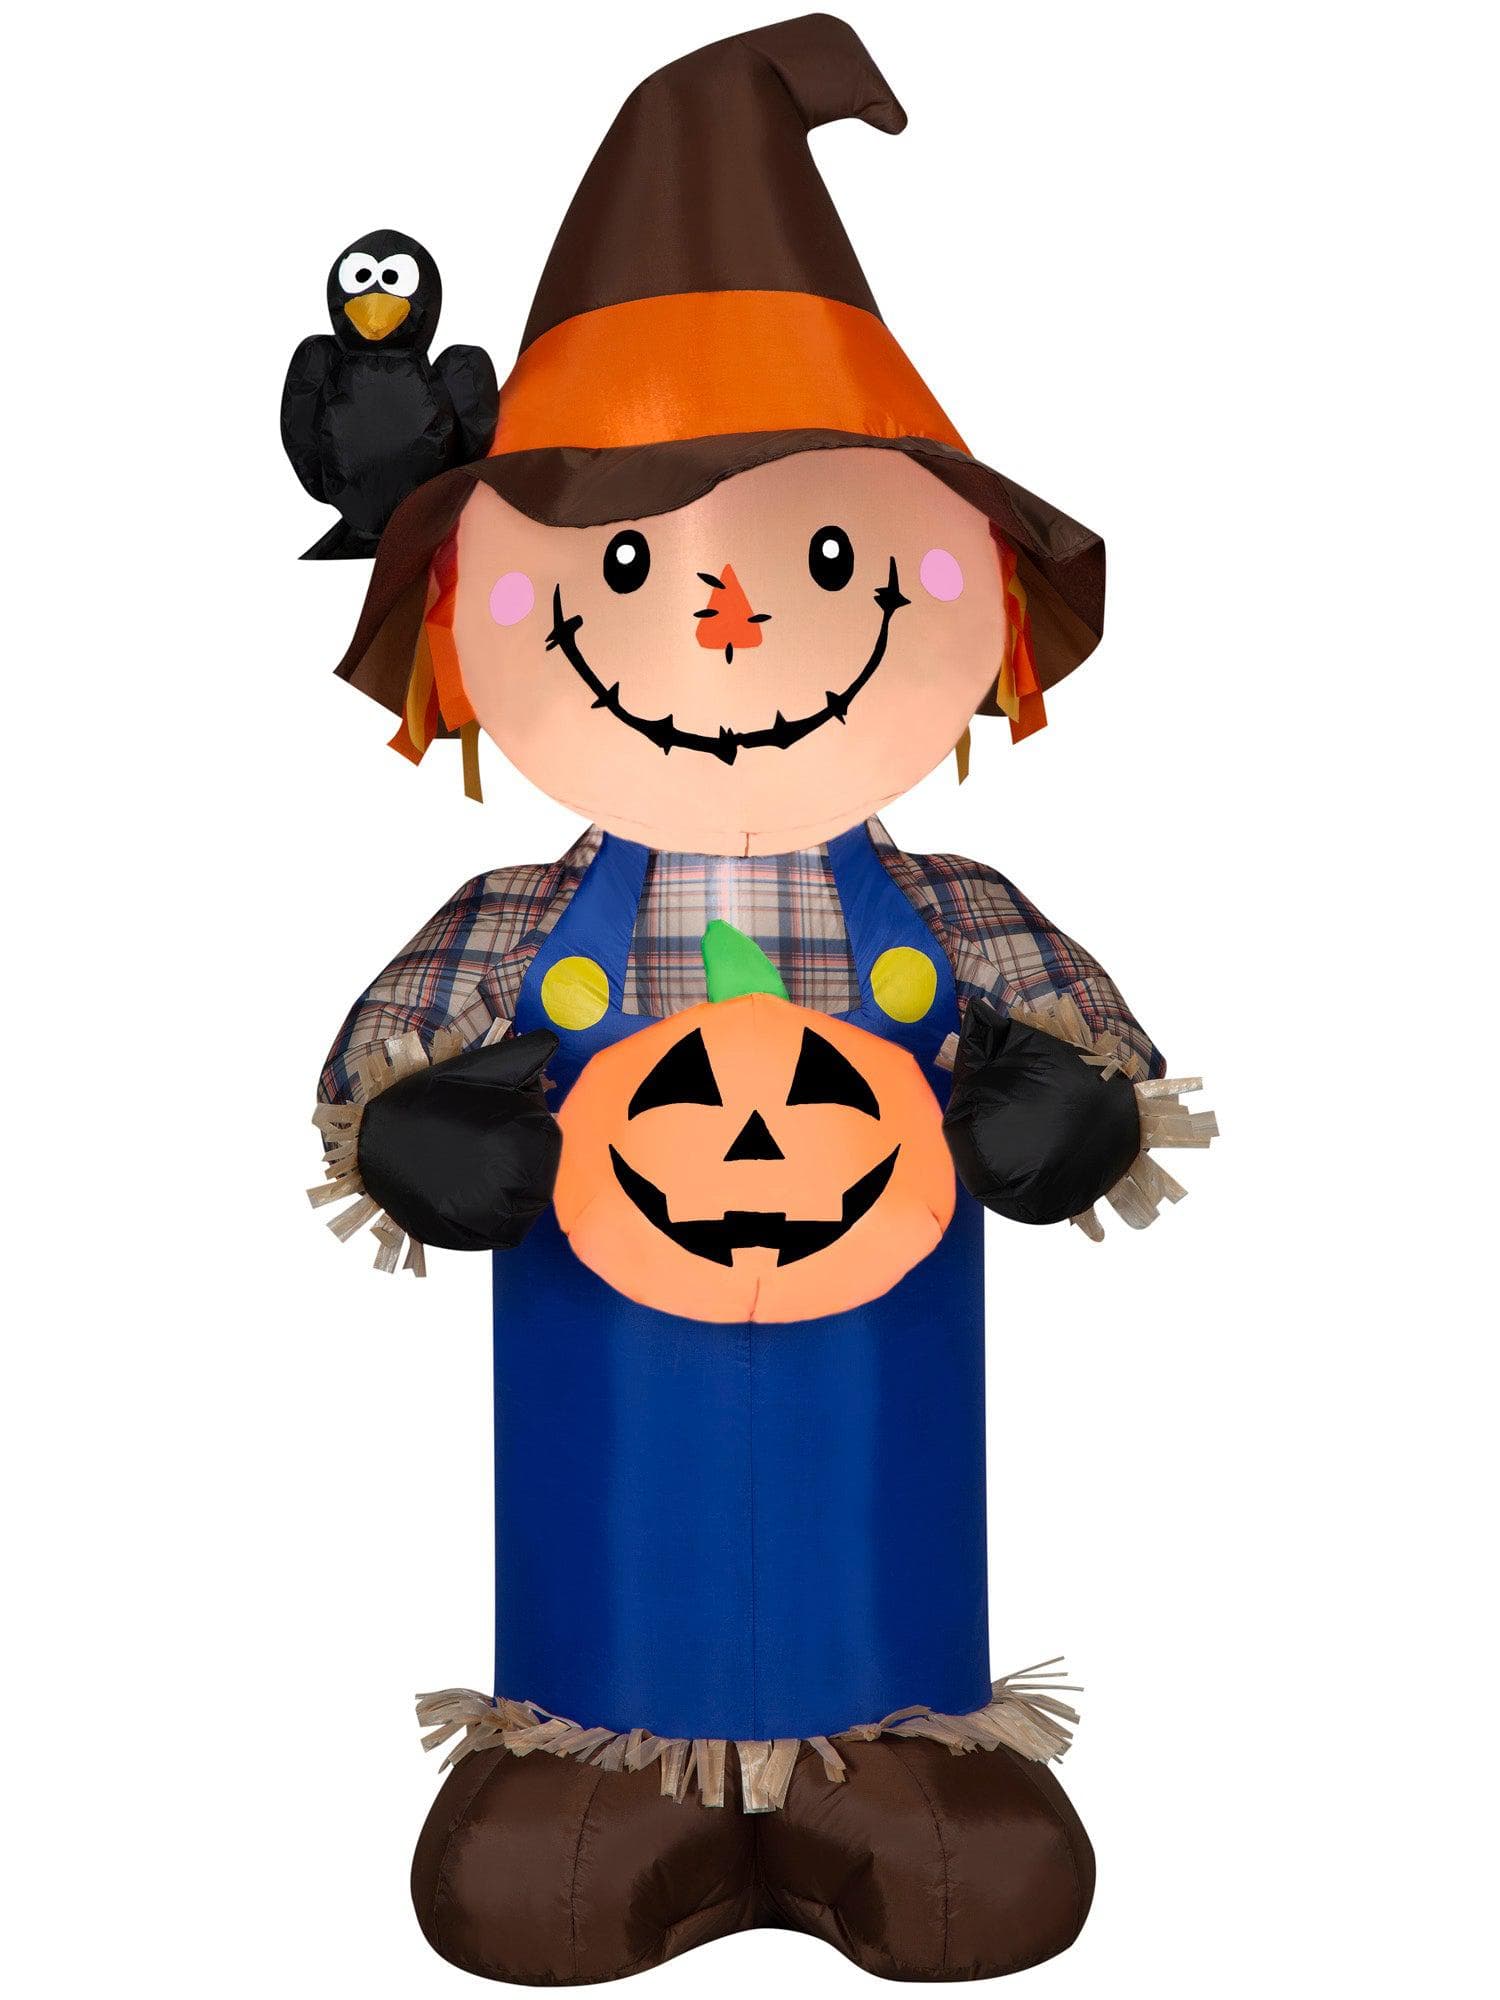 5 Foot Scarecrow with Jack-O'-Lantern Light Up Halloween Inflatable Lawn Decor - costumes.com